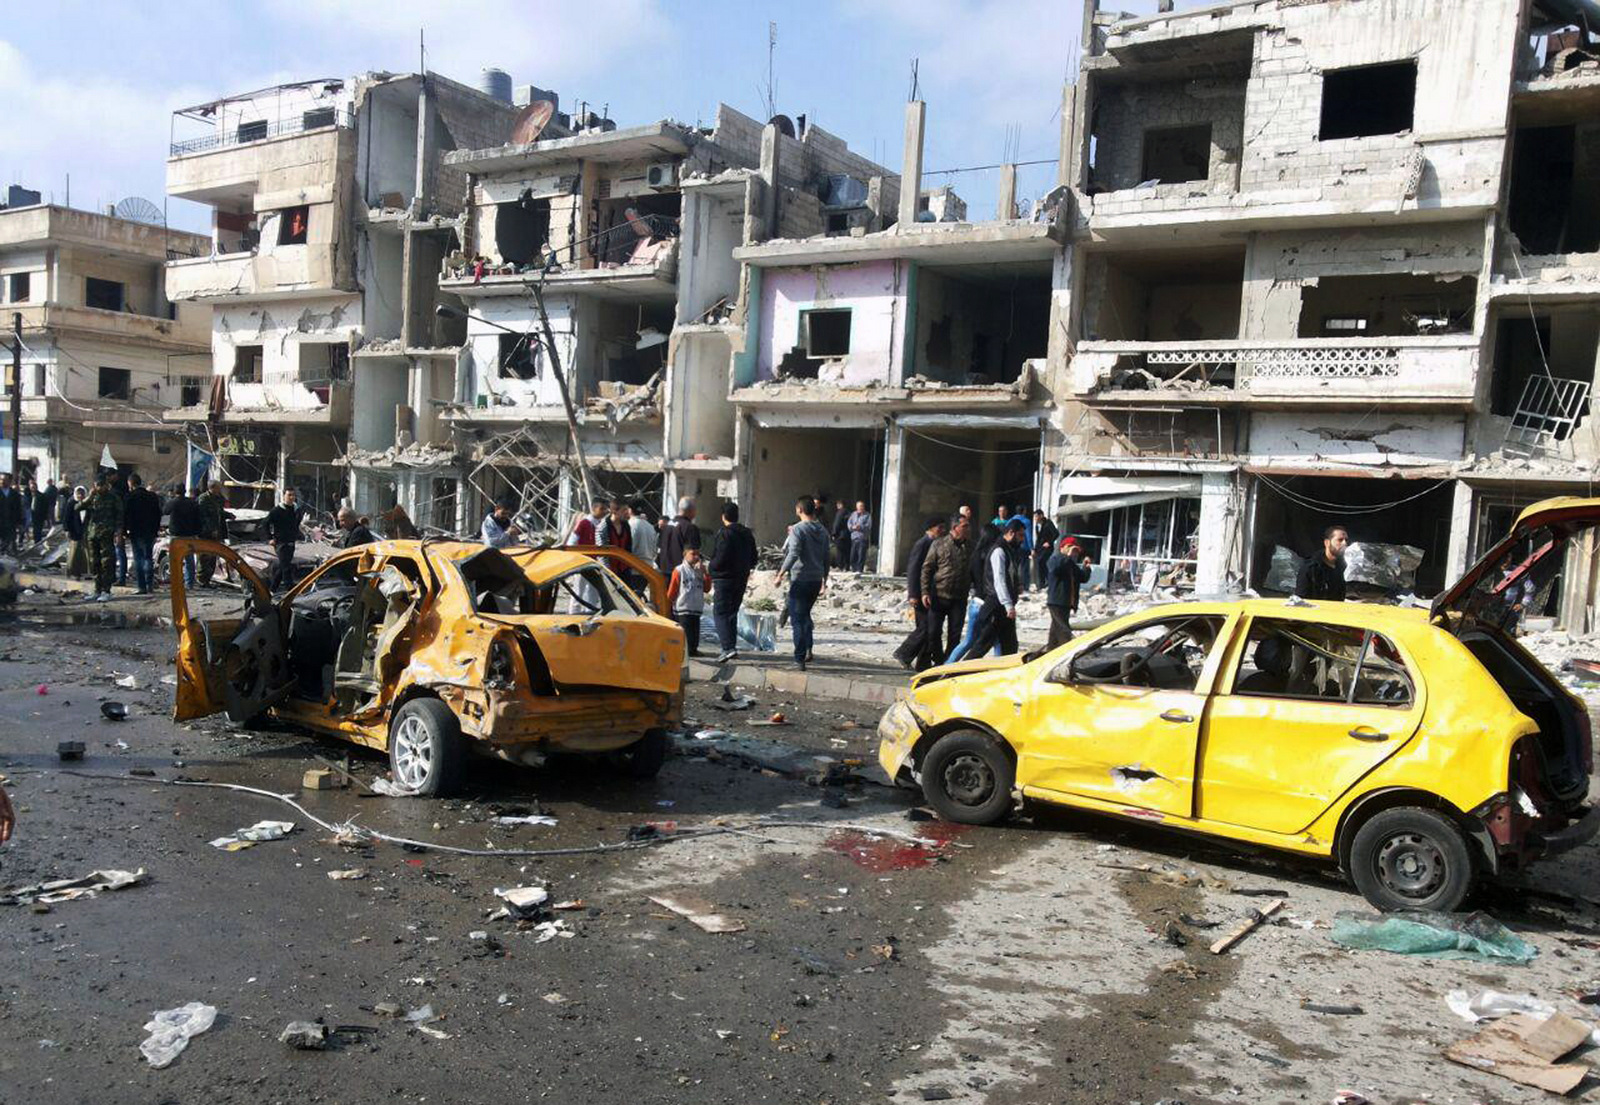 Syrian citizens gather at the scene where two blasts exploded in the pro-government neighborhood of Zahraa, in Homs province, Syria, Sunday, Feb. 21, 2016. Two blasts in the central Syrian city of Homs killed more than a dozen people and injured many others in a wave of violence. (SANA via AP)